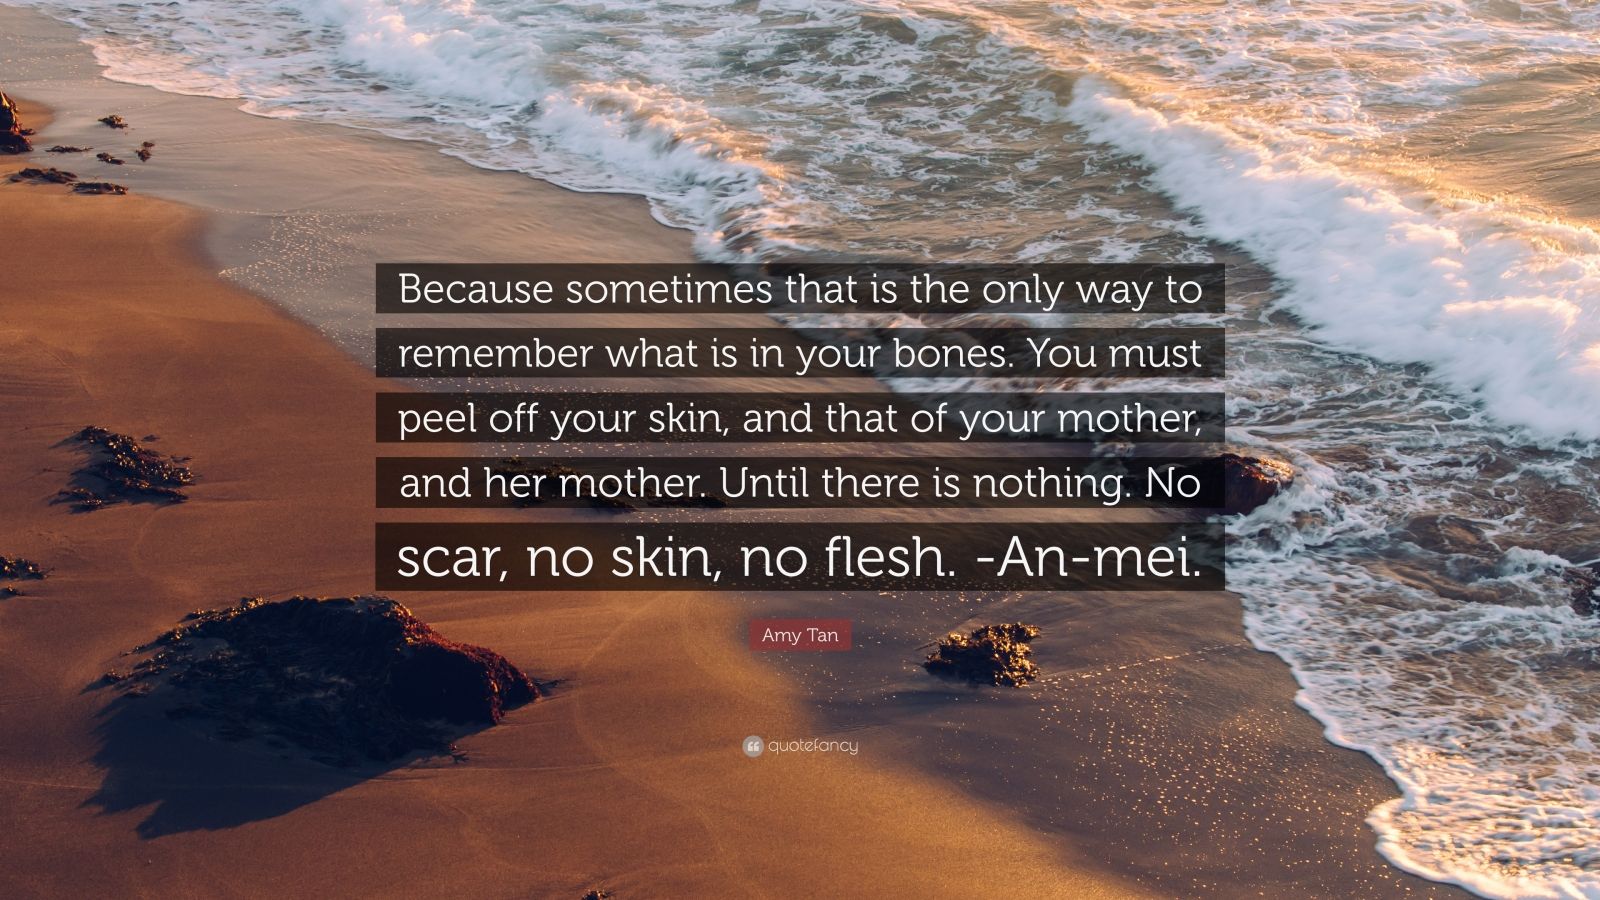 Amy Tan Quote: "Because sometimes that is the only way to ...